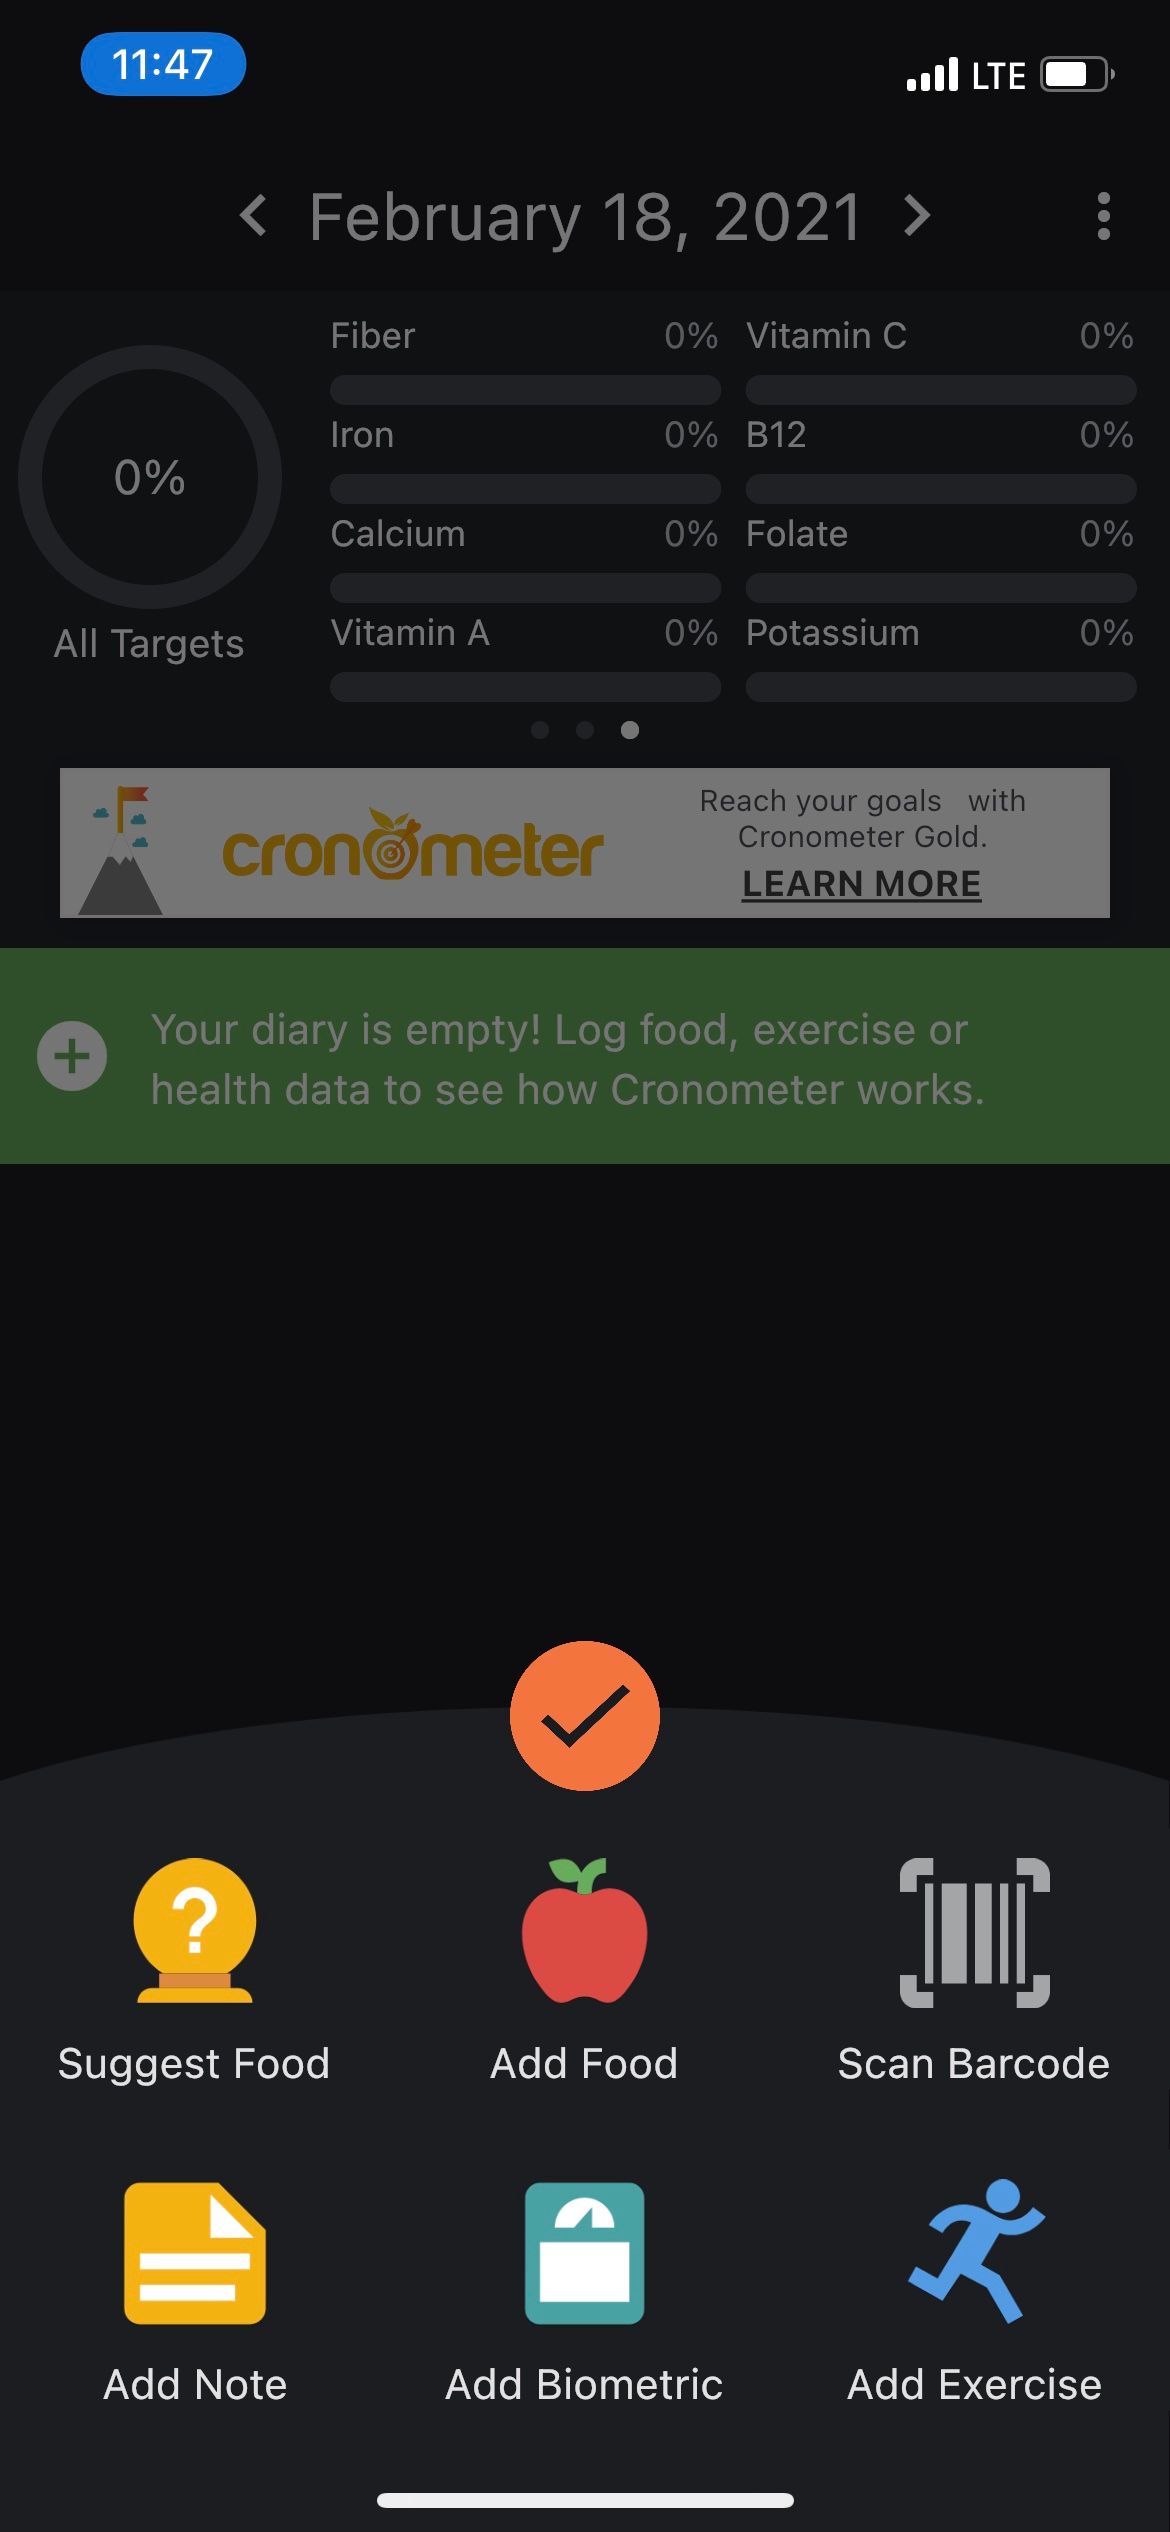 Cronometer options available on iPhone